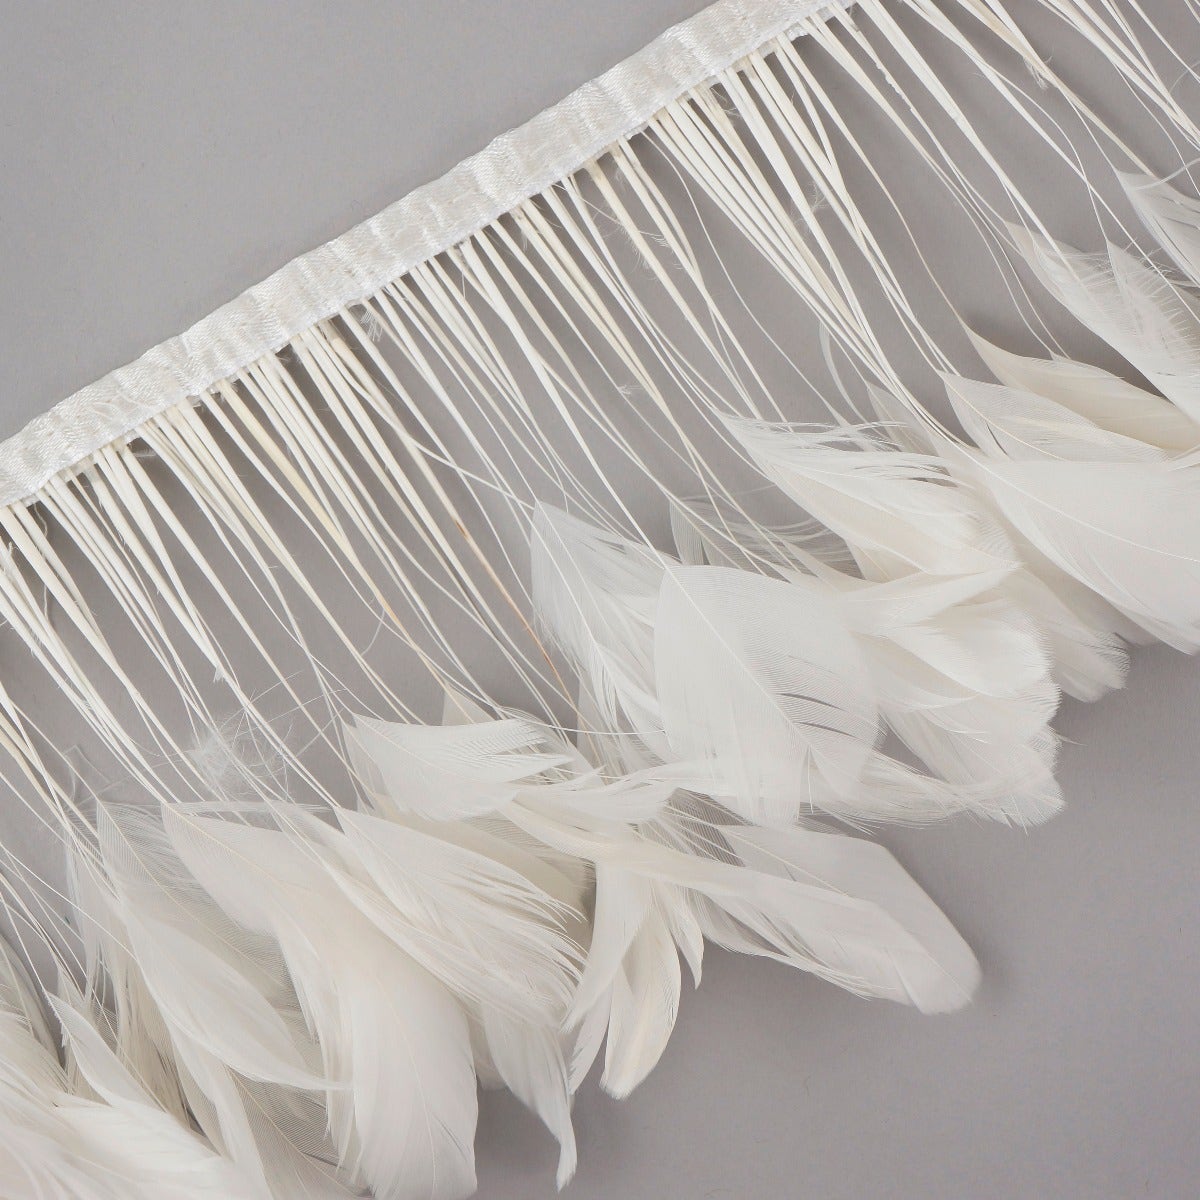 Stripped White-Dyed Coque Fringe - White